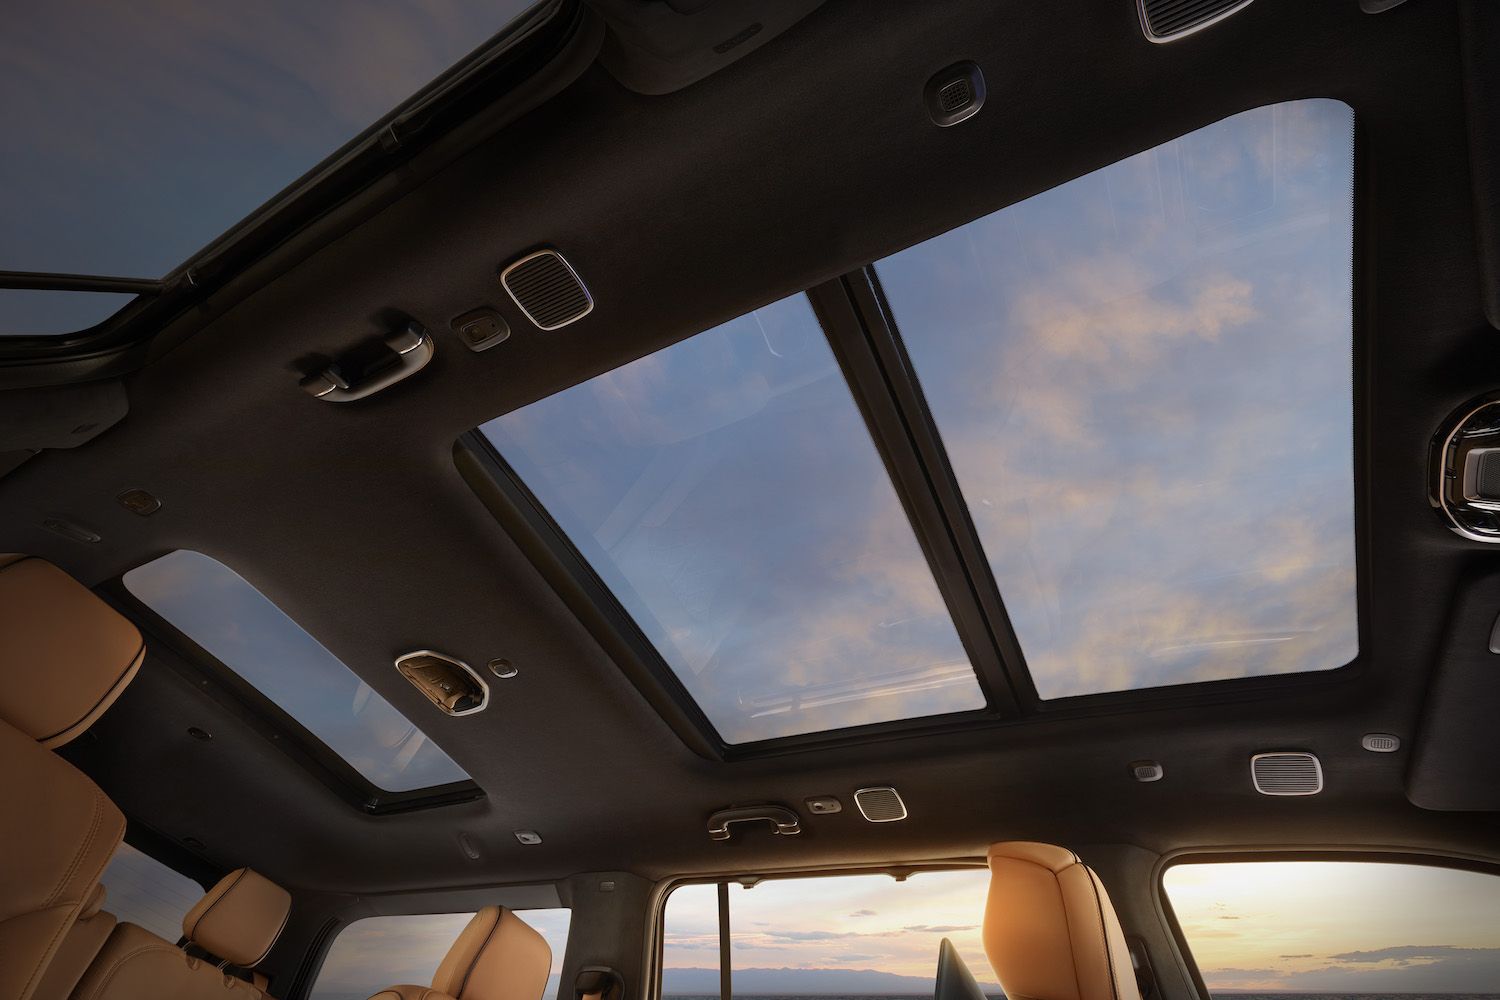 Pink clouds visible through the sunroof of a Jeep Grand Wagoneer luxury SUV.